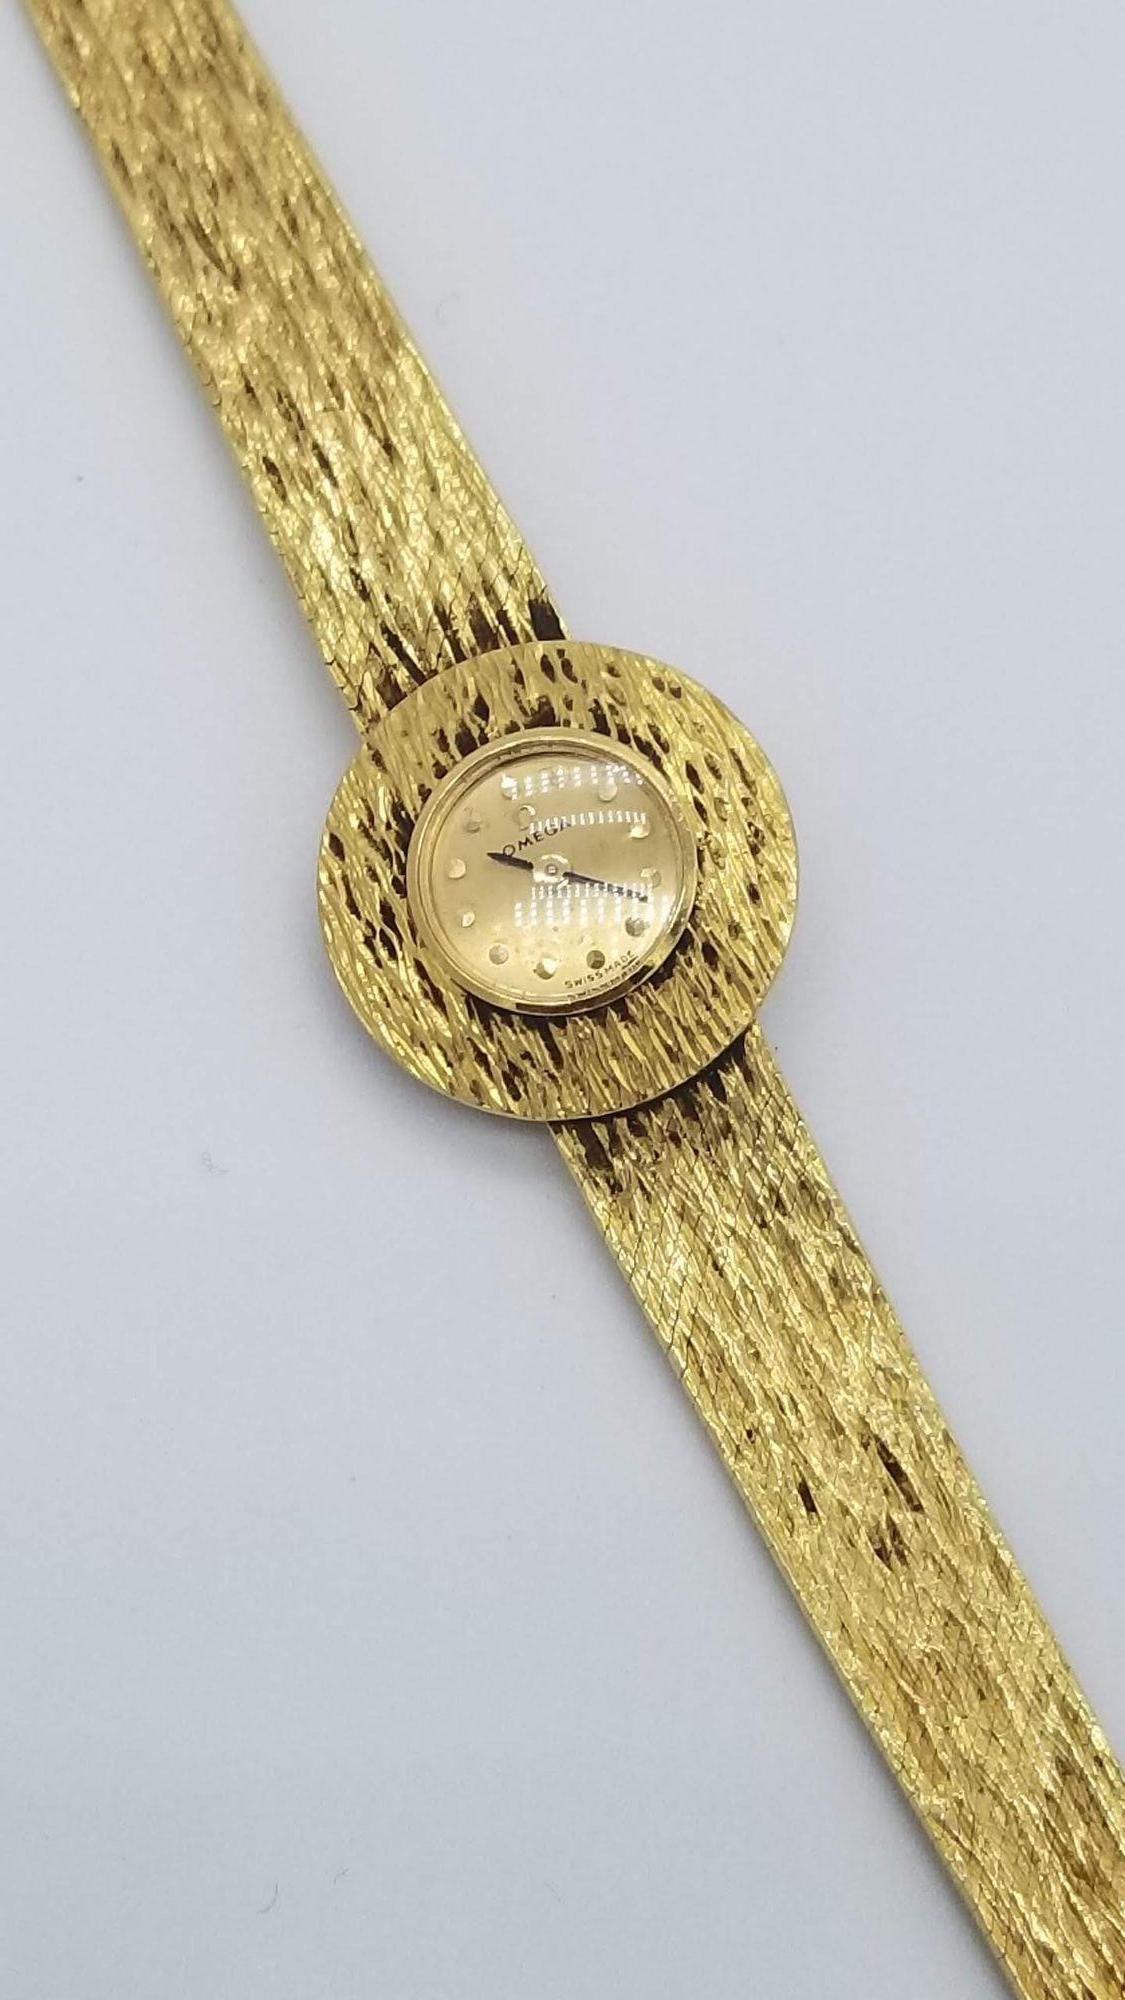 This Mid-Century Modern Omega 14-karat women's wristwatch features 17 jewel movement and a textured gold band. Stamped 